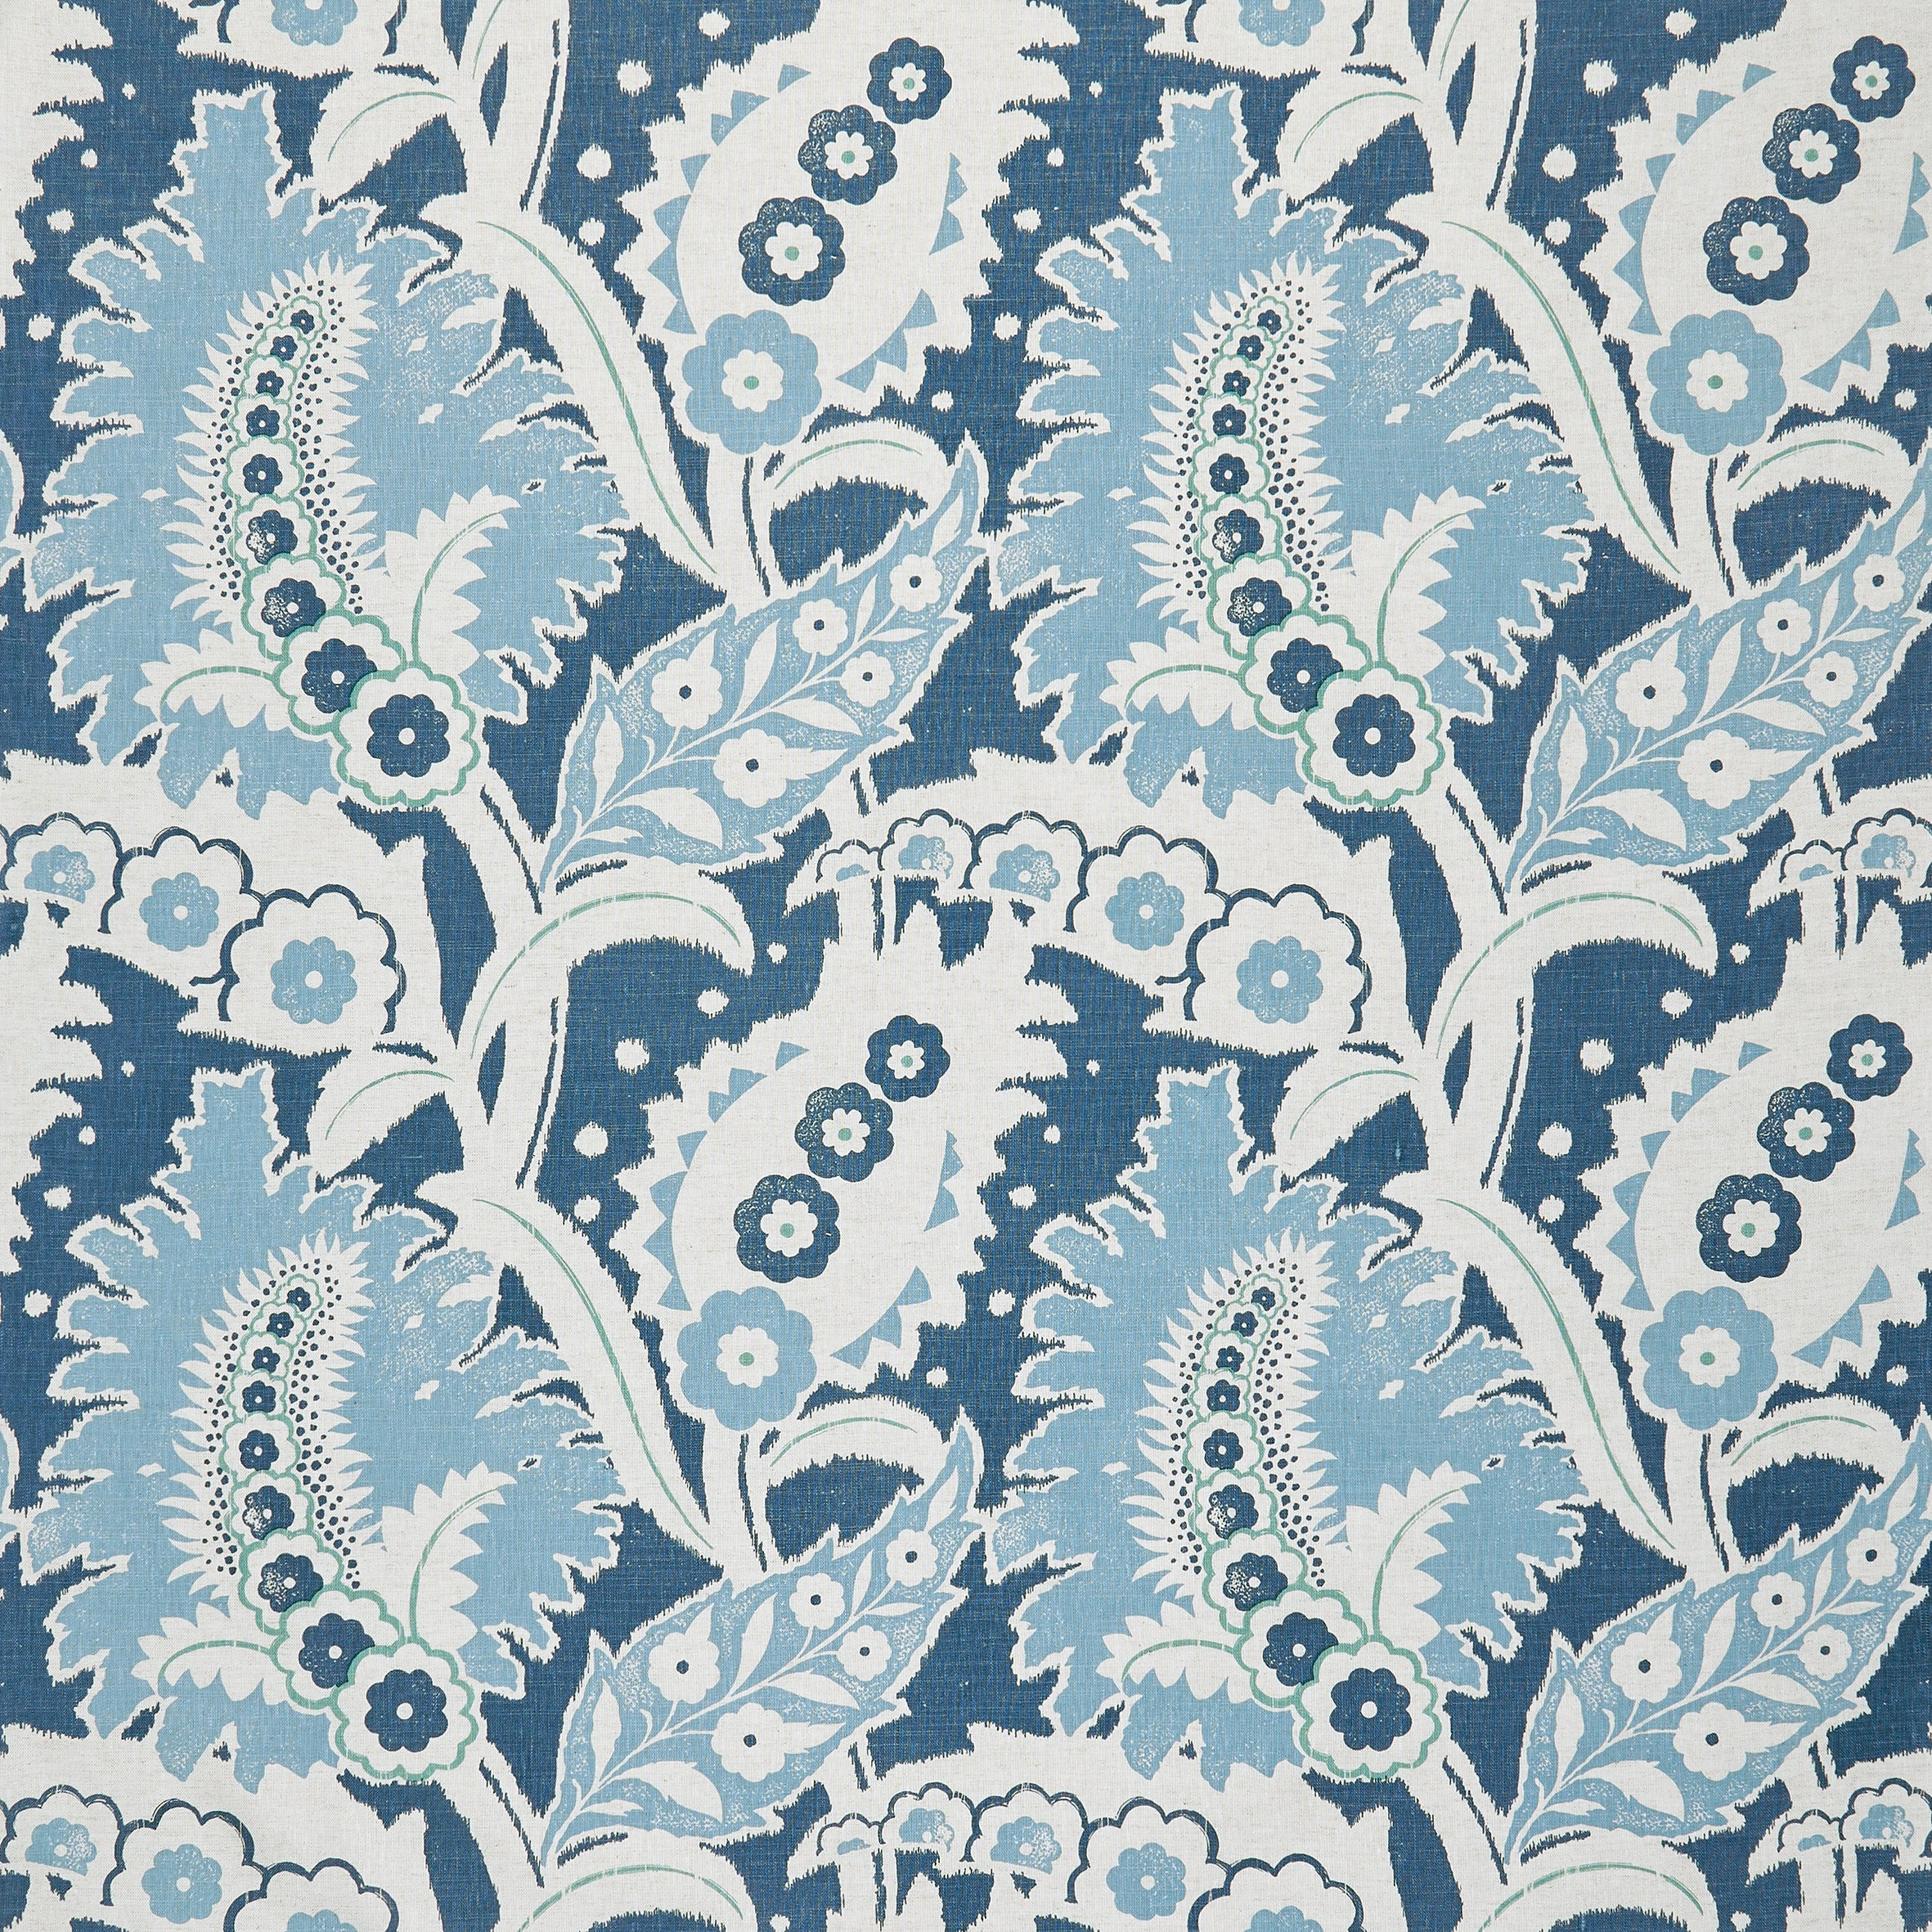 Detail of fabric in a botanical paisley print in shades of white, blue and green on a navy field.